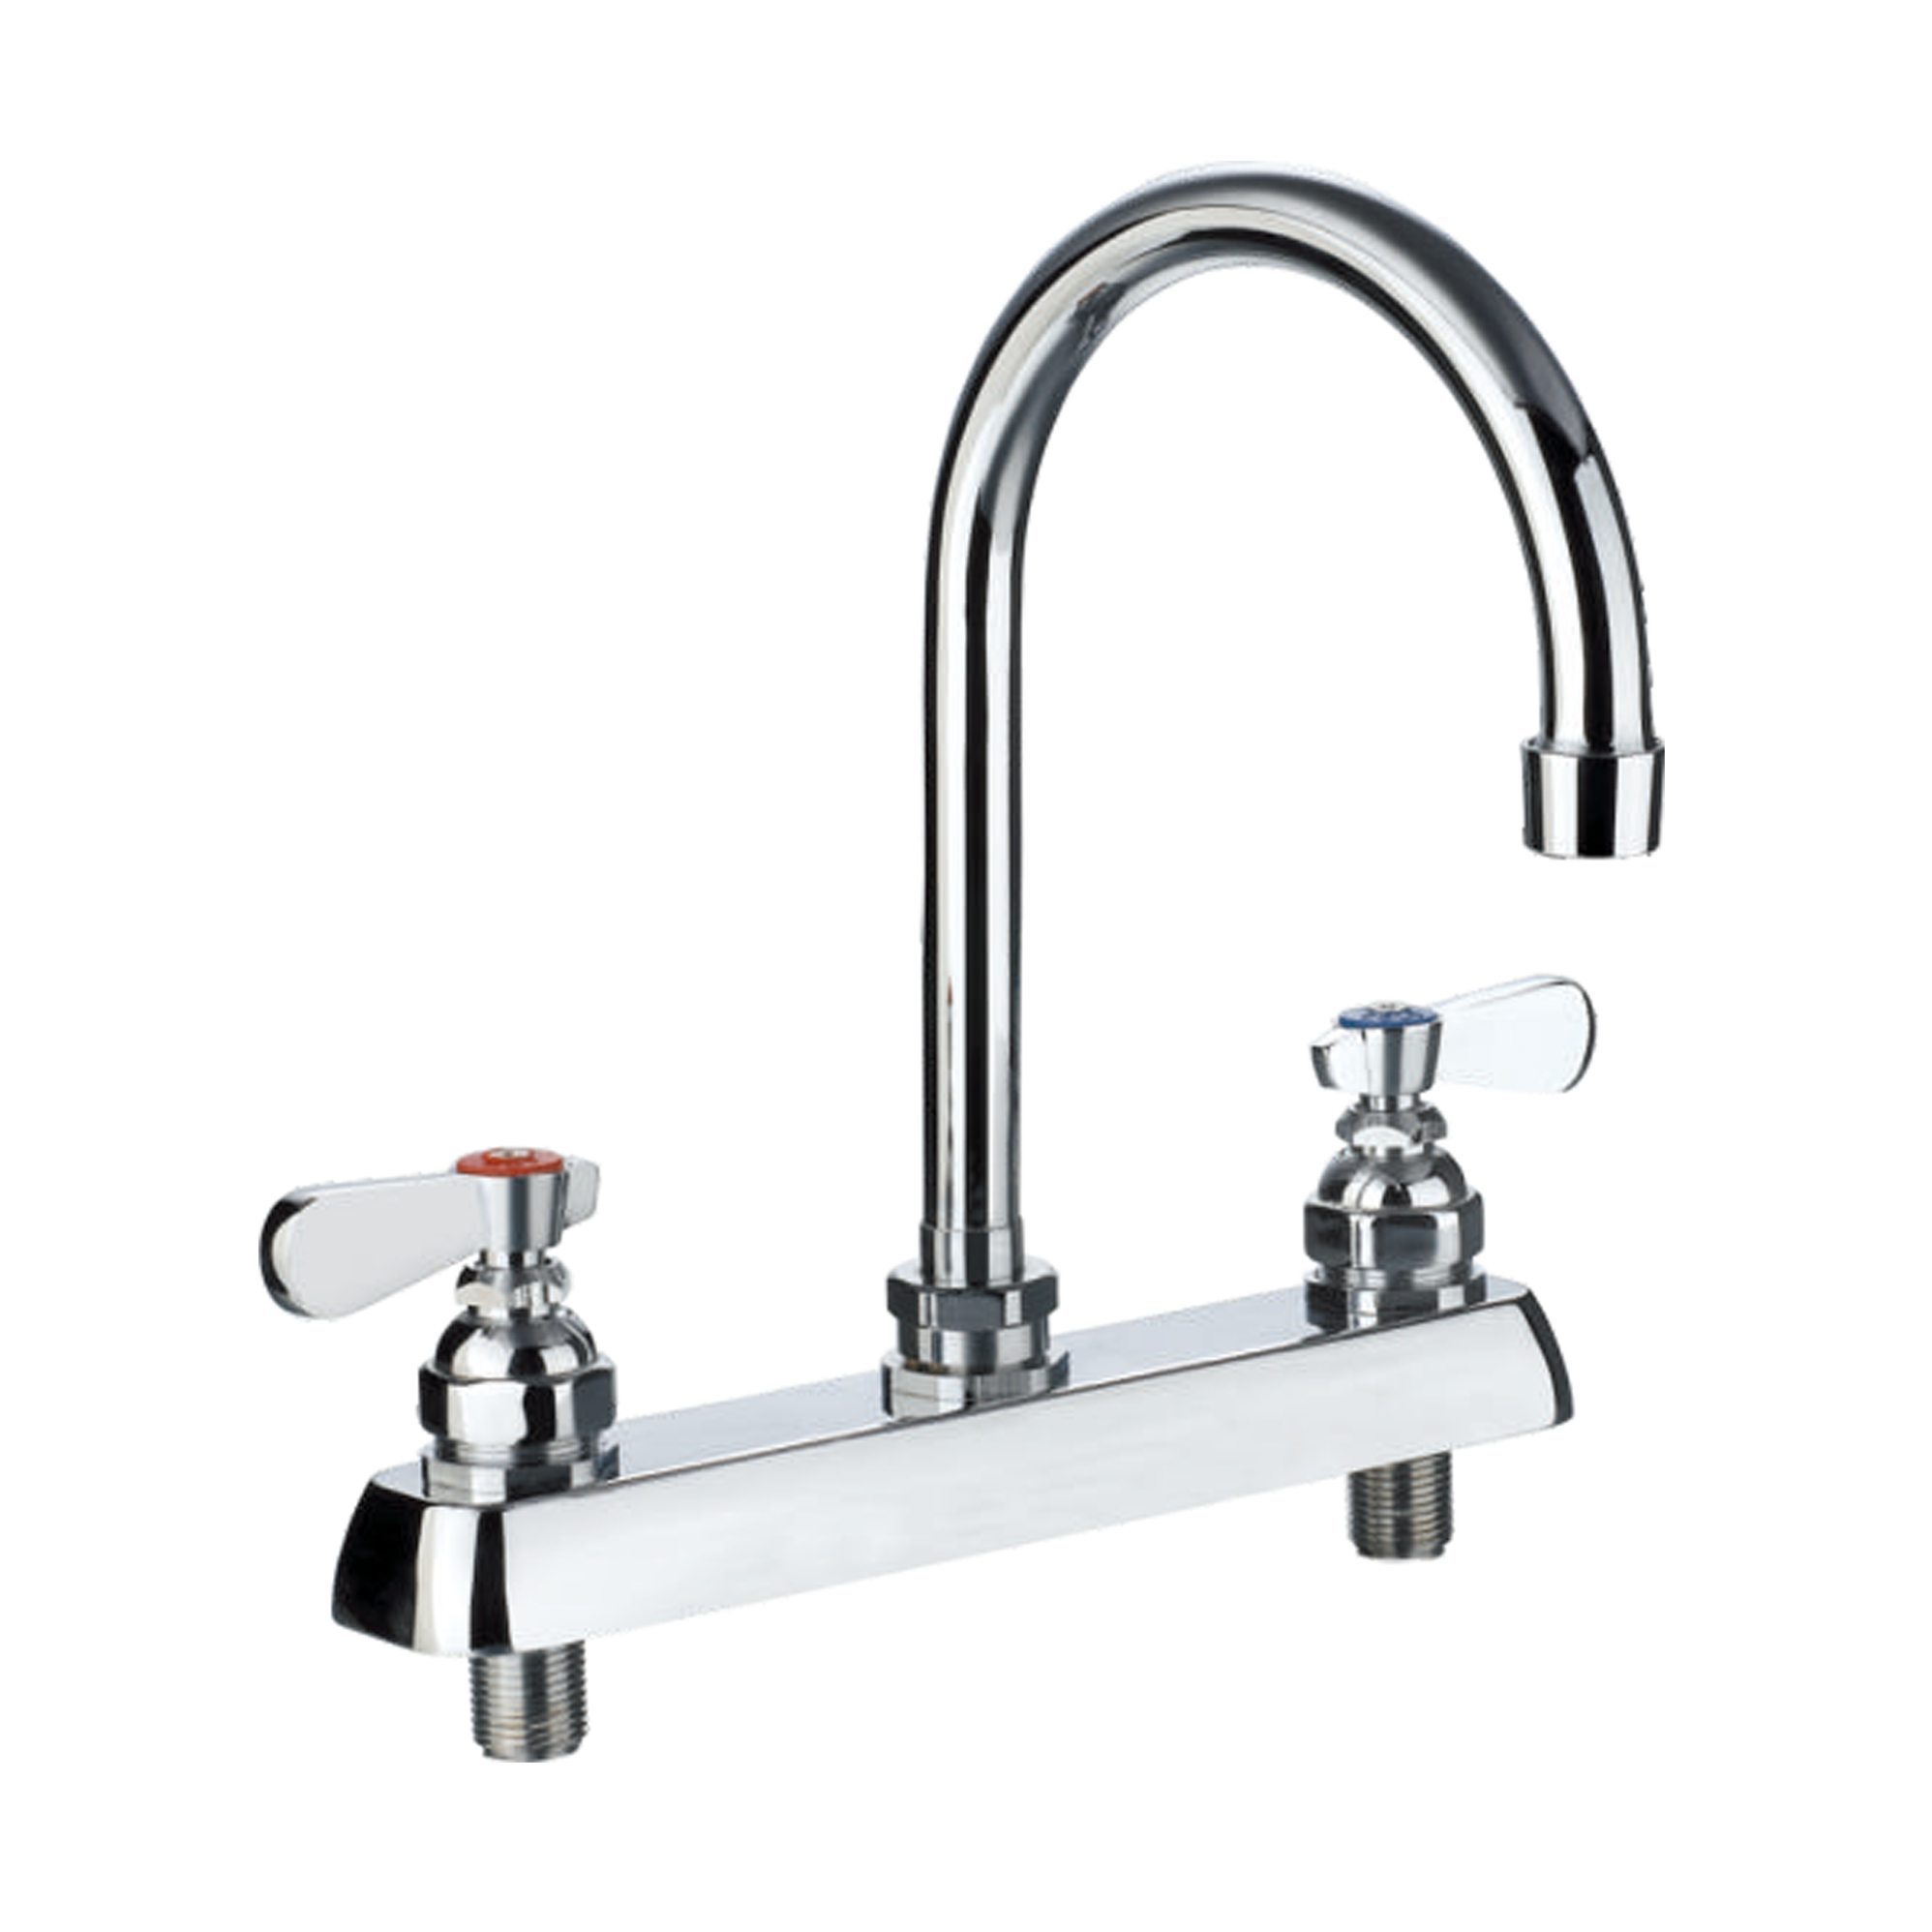 Top-rinse 9810-P3 Double workboard faucet